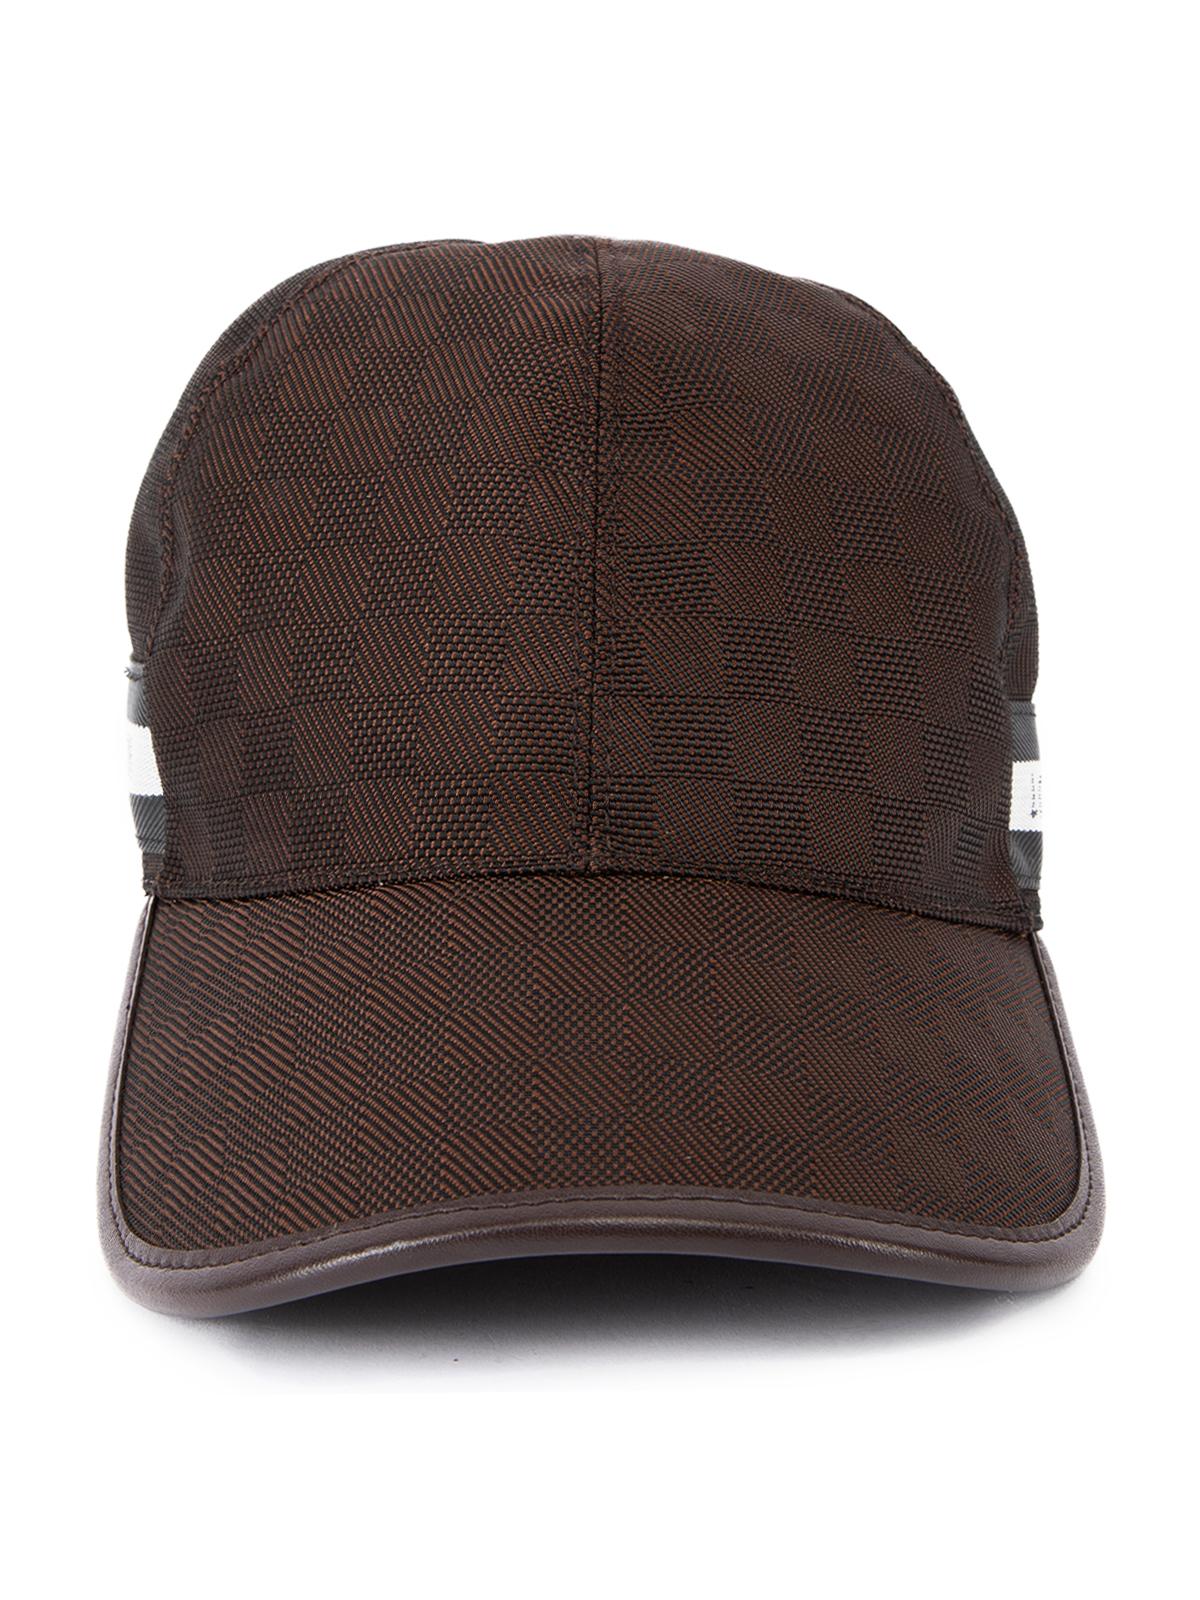 CONDITION is Very good. Minimal wear to cap is evident. Minimal wear to interior rim on this used Luis Vuitton resale item. Details Brown Leather Cotton Damier print pattern Adjustable back strap Made in Italy Composition EXTERIOR: Leather INTERIOR: